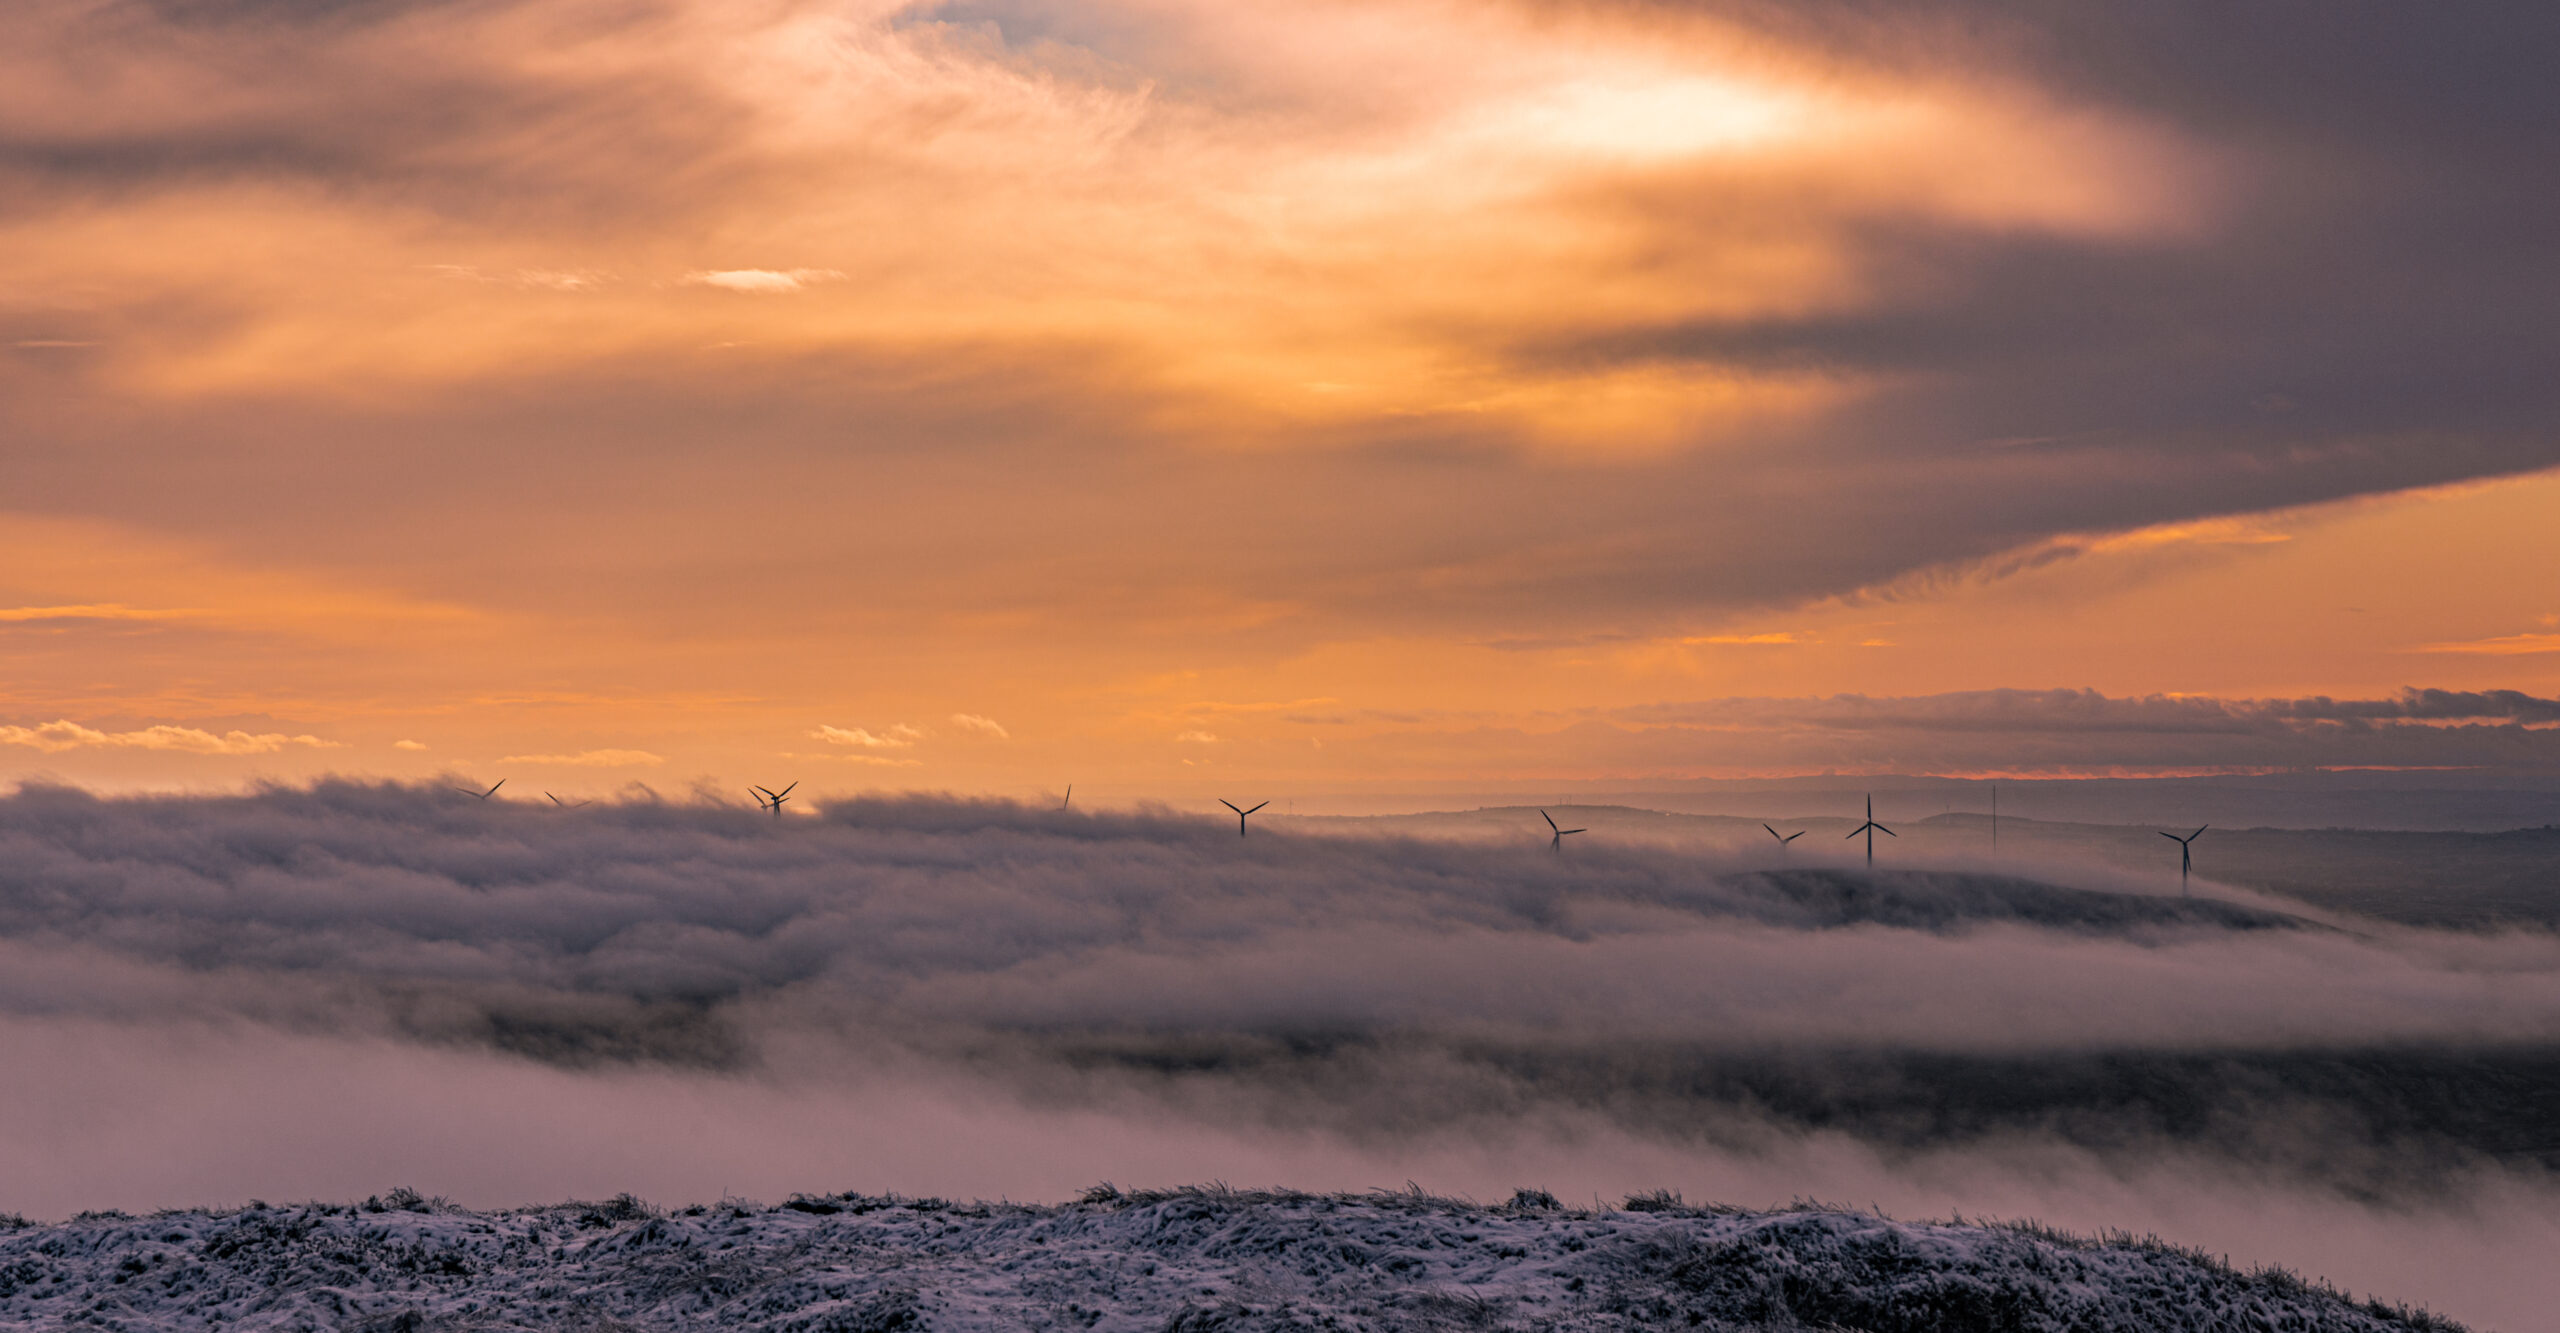 Electric generating windmills appearing through a cloud inversion at sunset, Slieveanorra Mountain, Moyle Way, Glens of Antrim, Causeway Coast and Glens, Northern Ireland